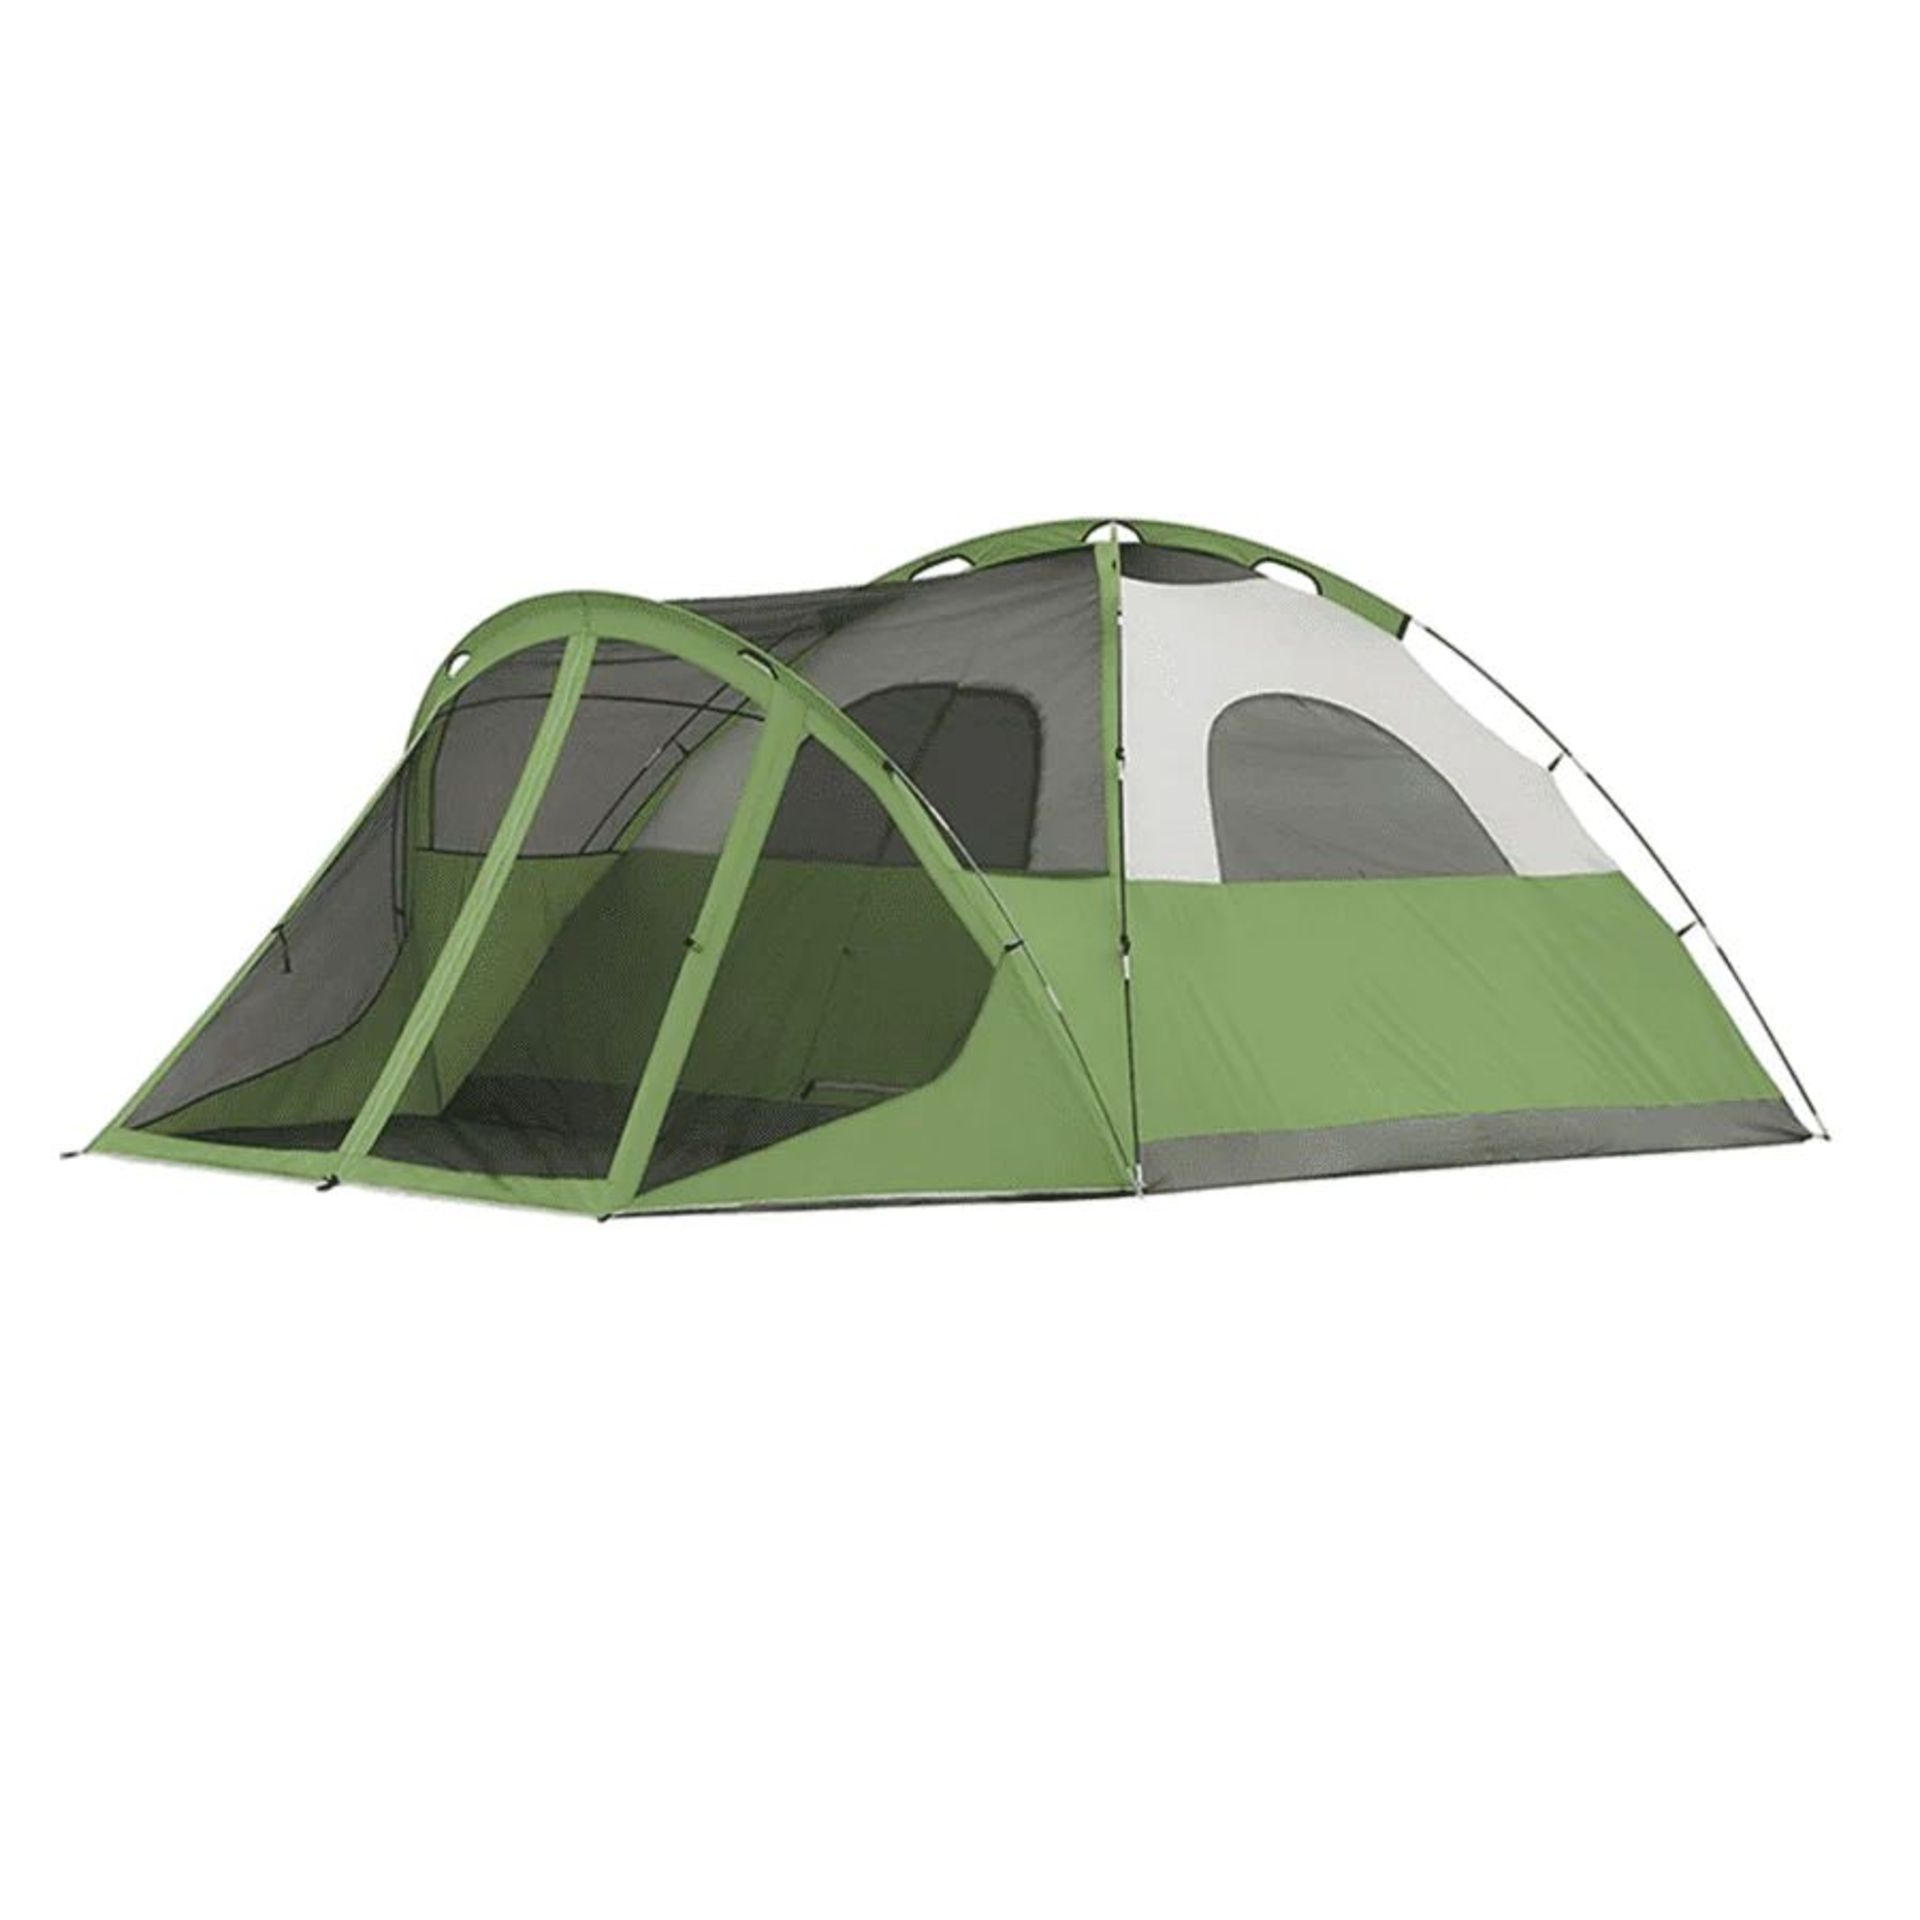 RBSM SPORTS 6-PERSON DOME CAMPING TENT W/ RAINFLY (NEW) (MSRP $300) - Bild 2 aus 4